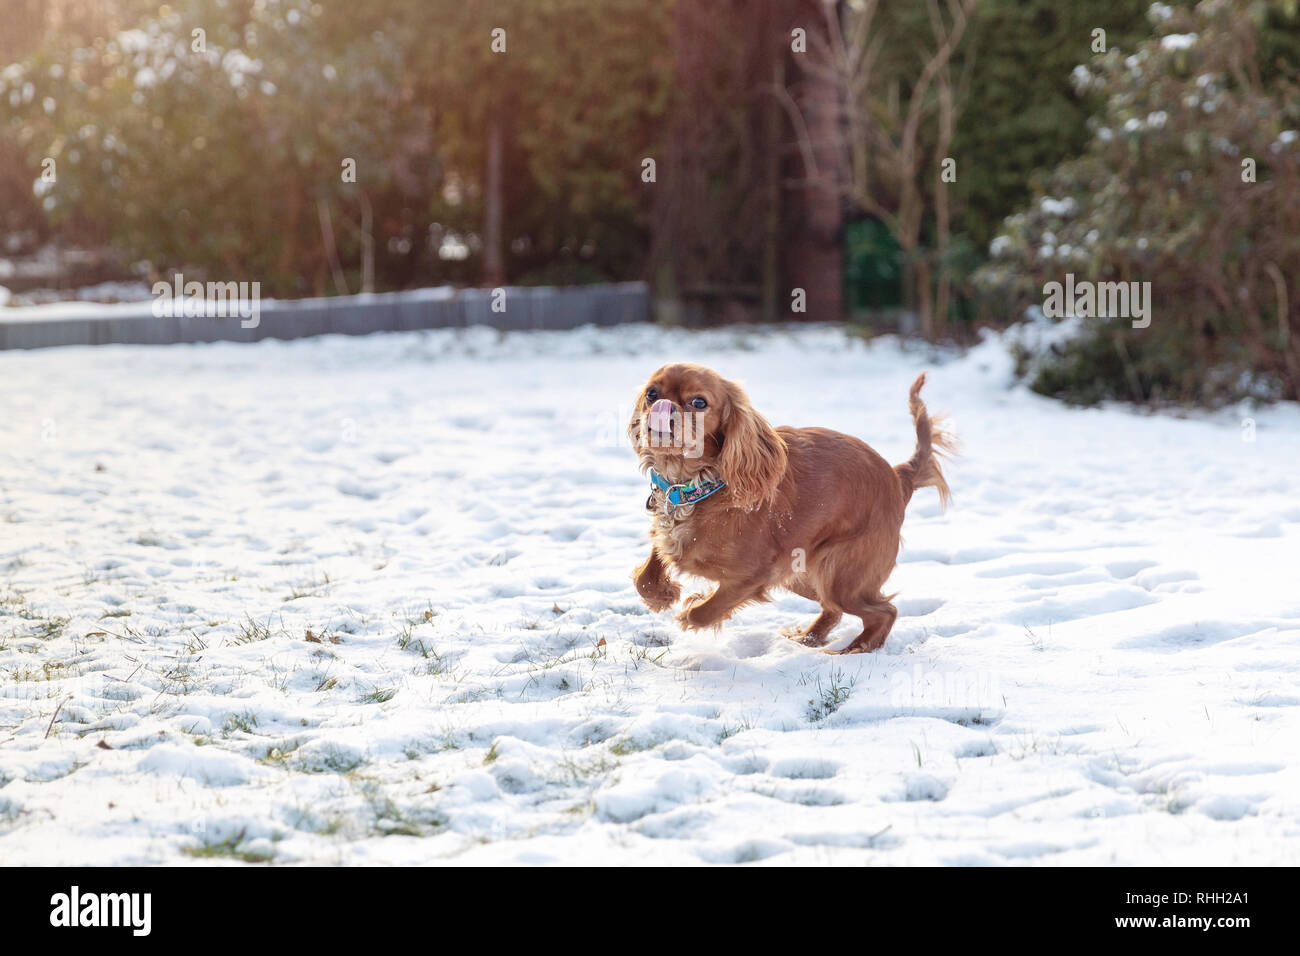 Cute playful puppy on the snow, winter background Stock Photo